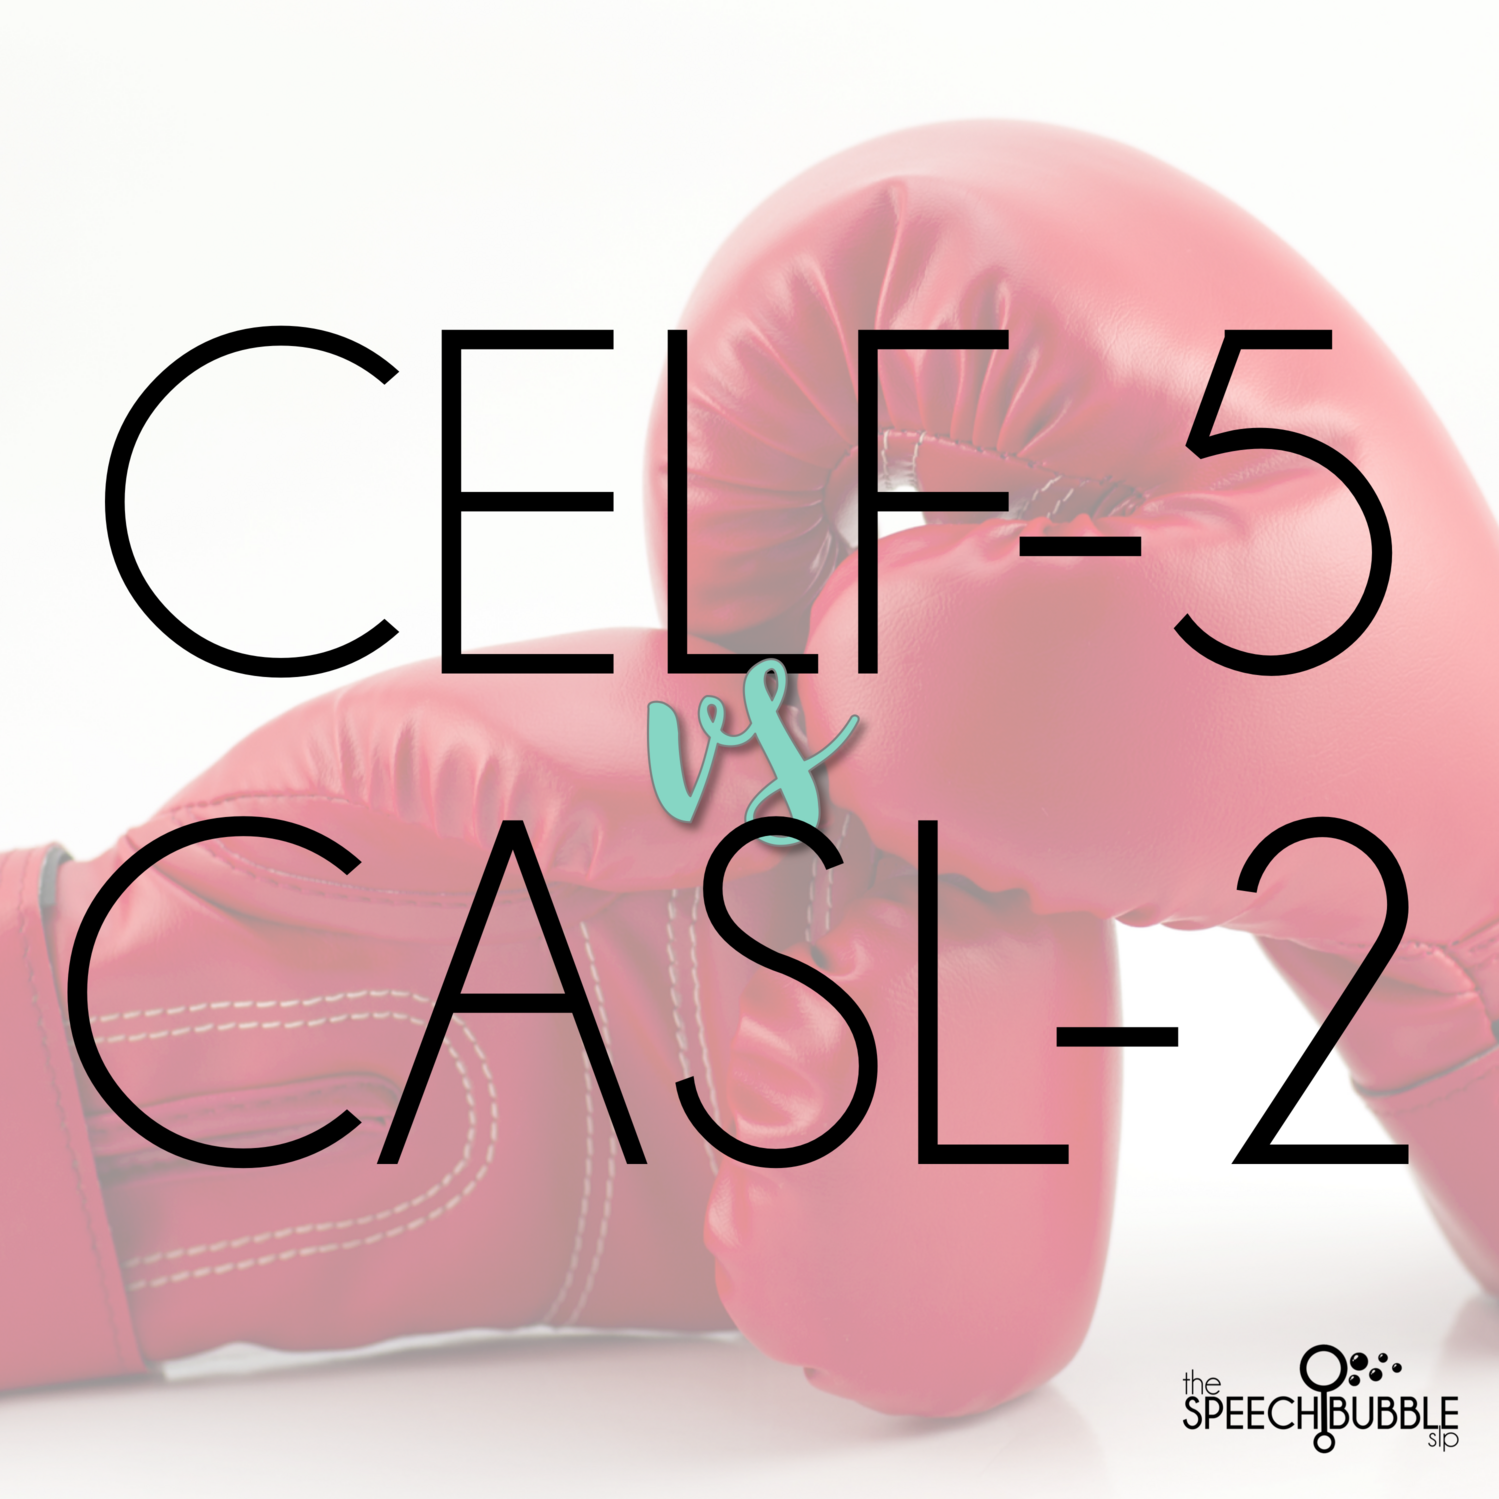 Speech Therapy Evaluations: CELF-5 vs CASL-2